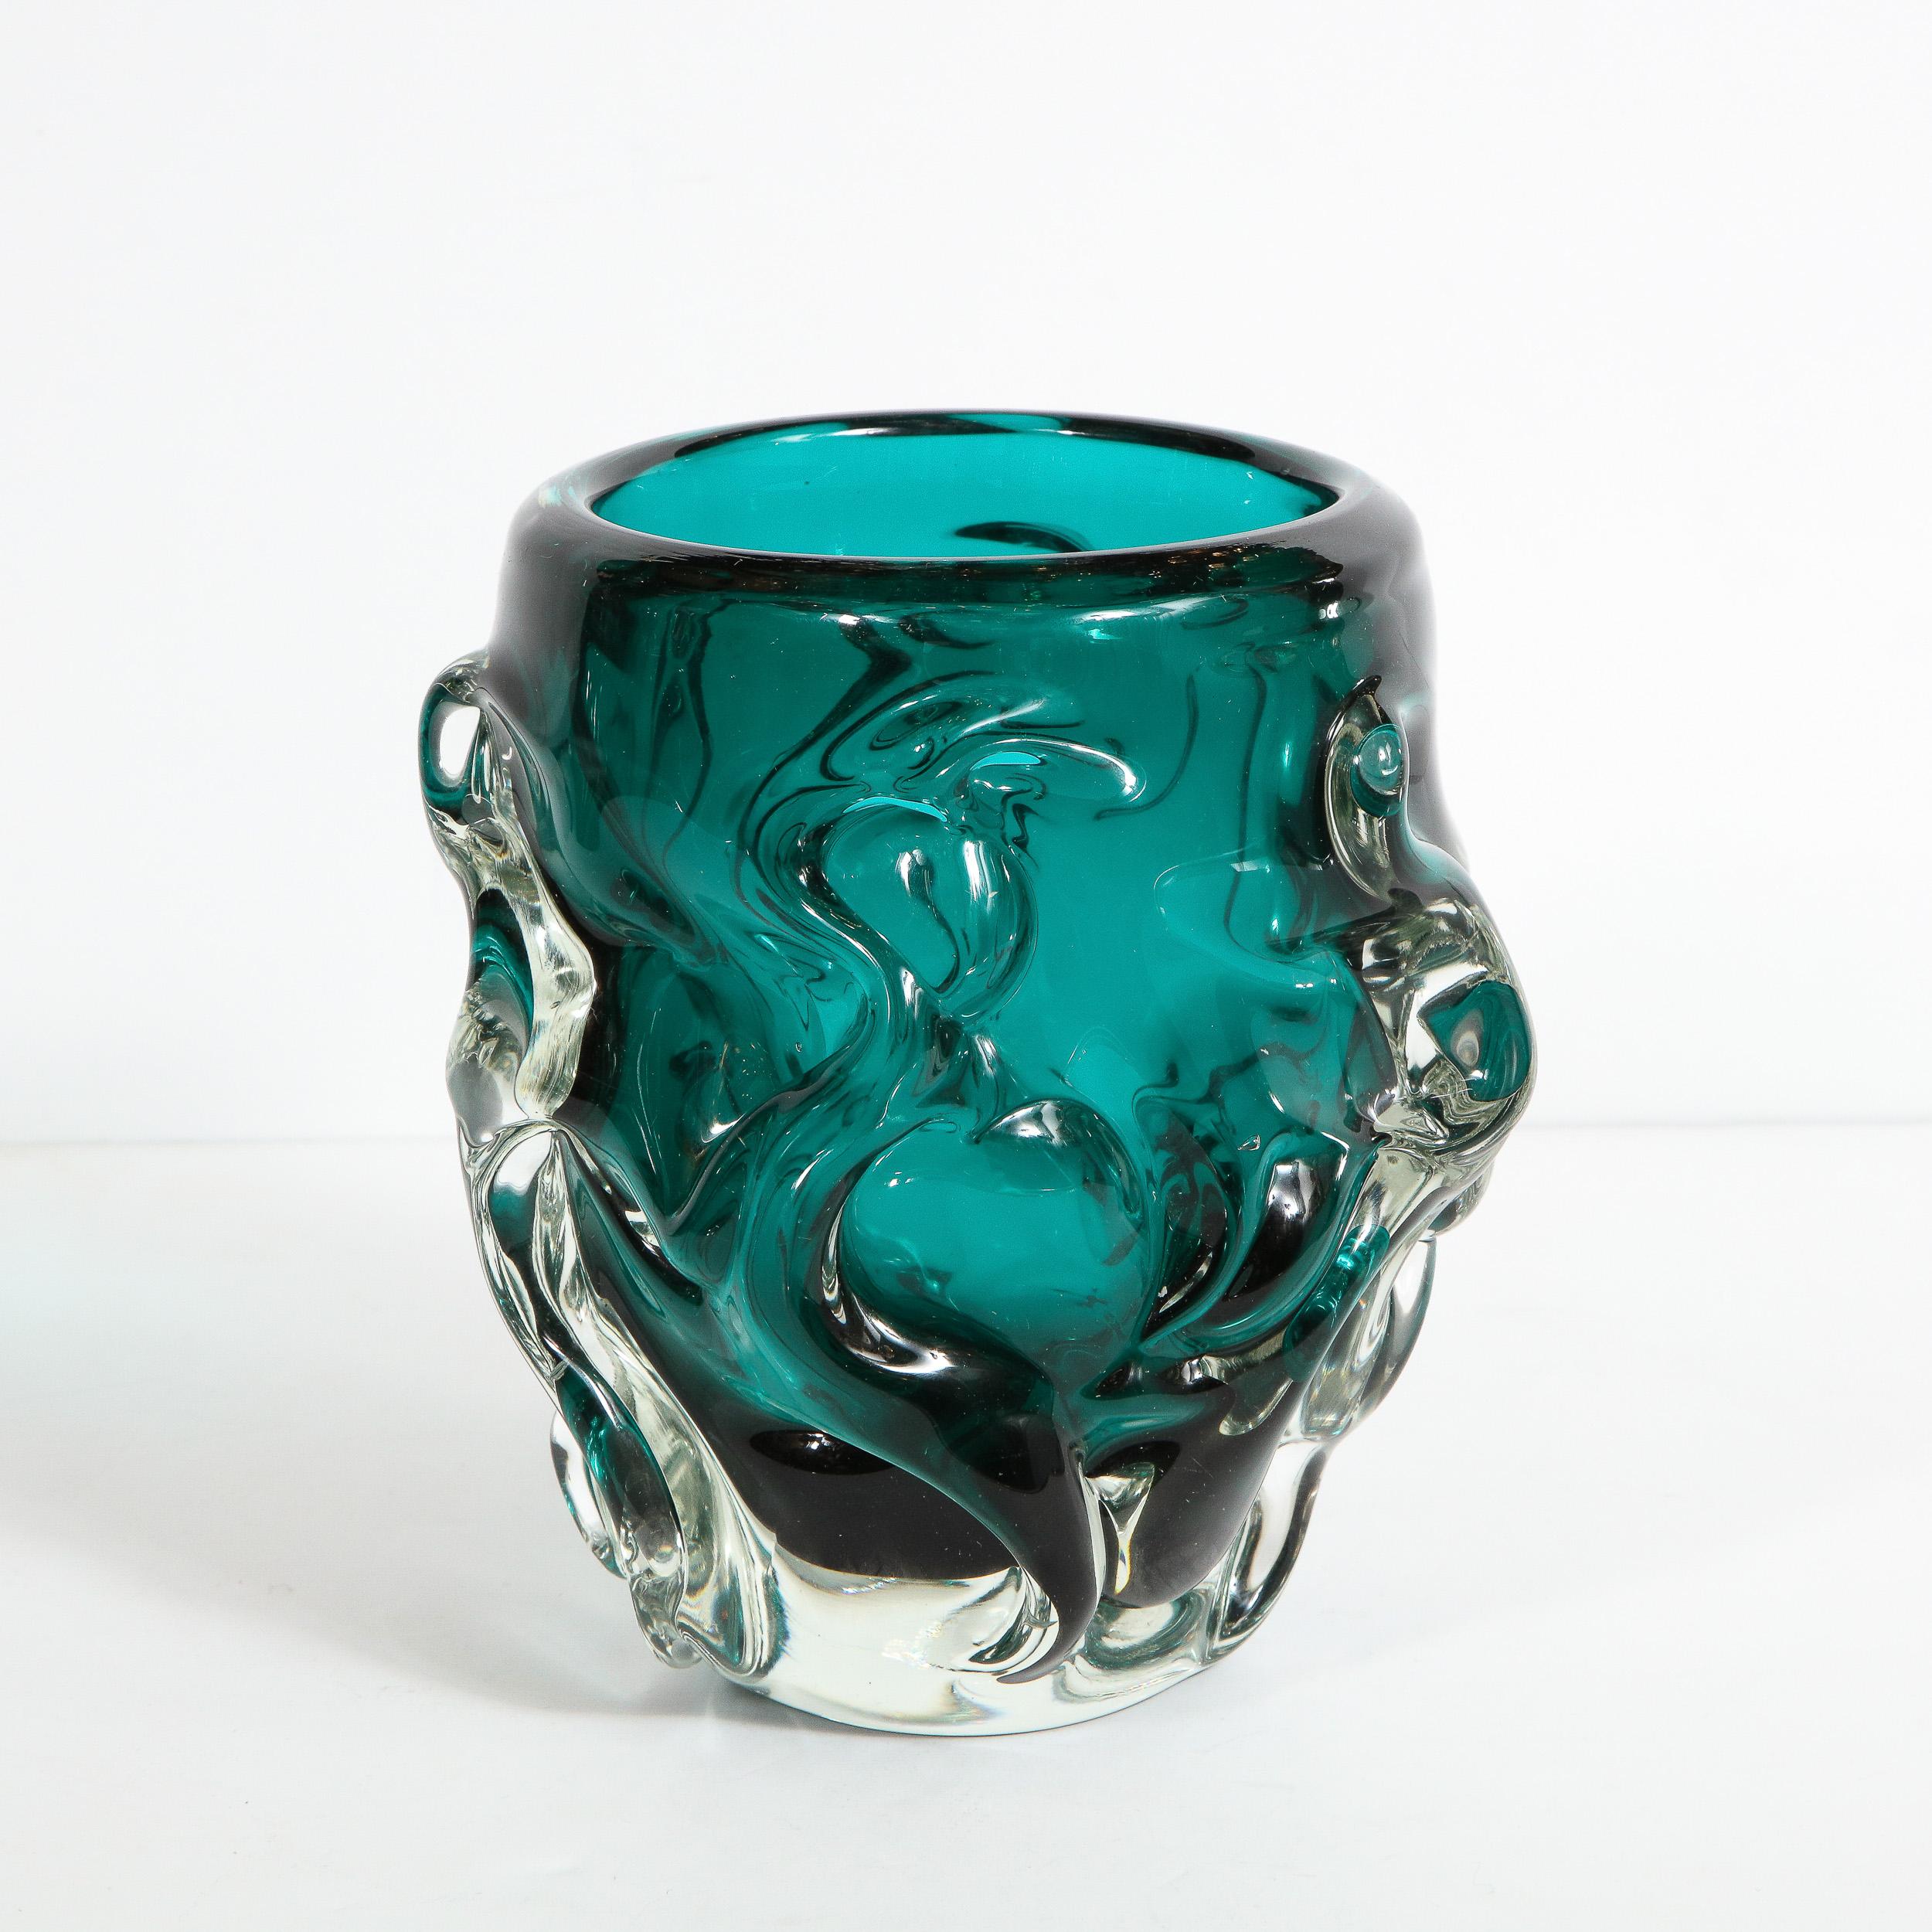 Mid-20th Century Mid-Century Modern Sculptural Hand Blown Murano Teal and Translucent Glass Vase